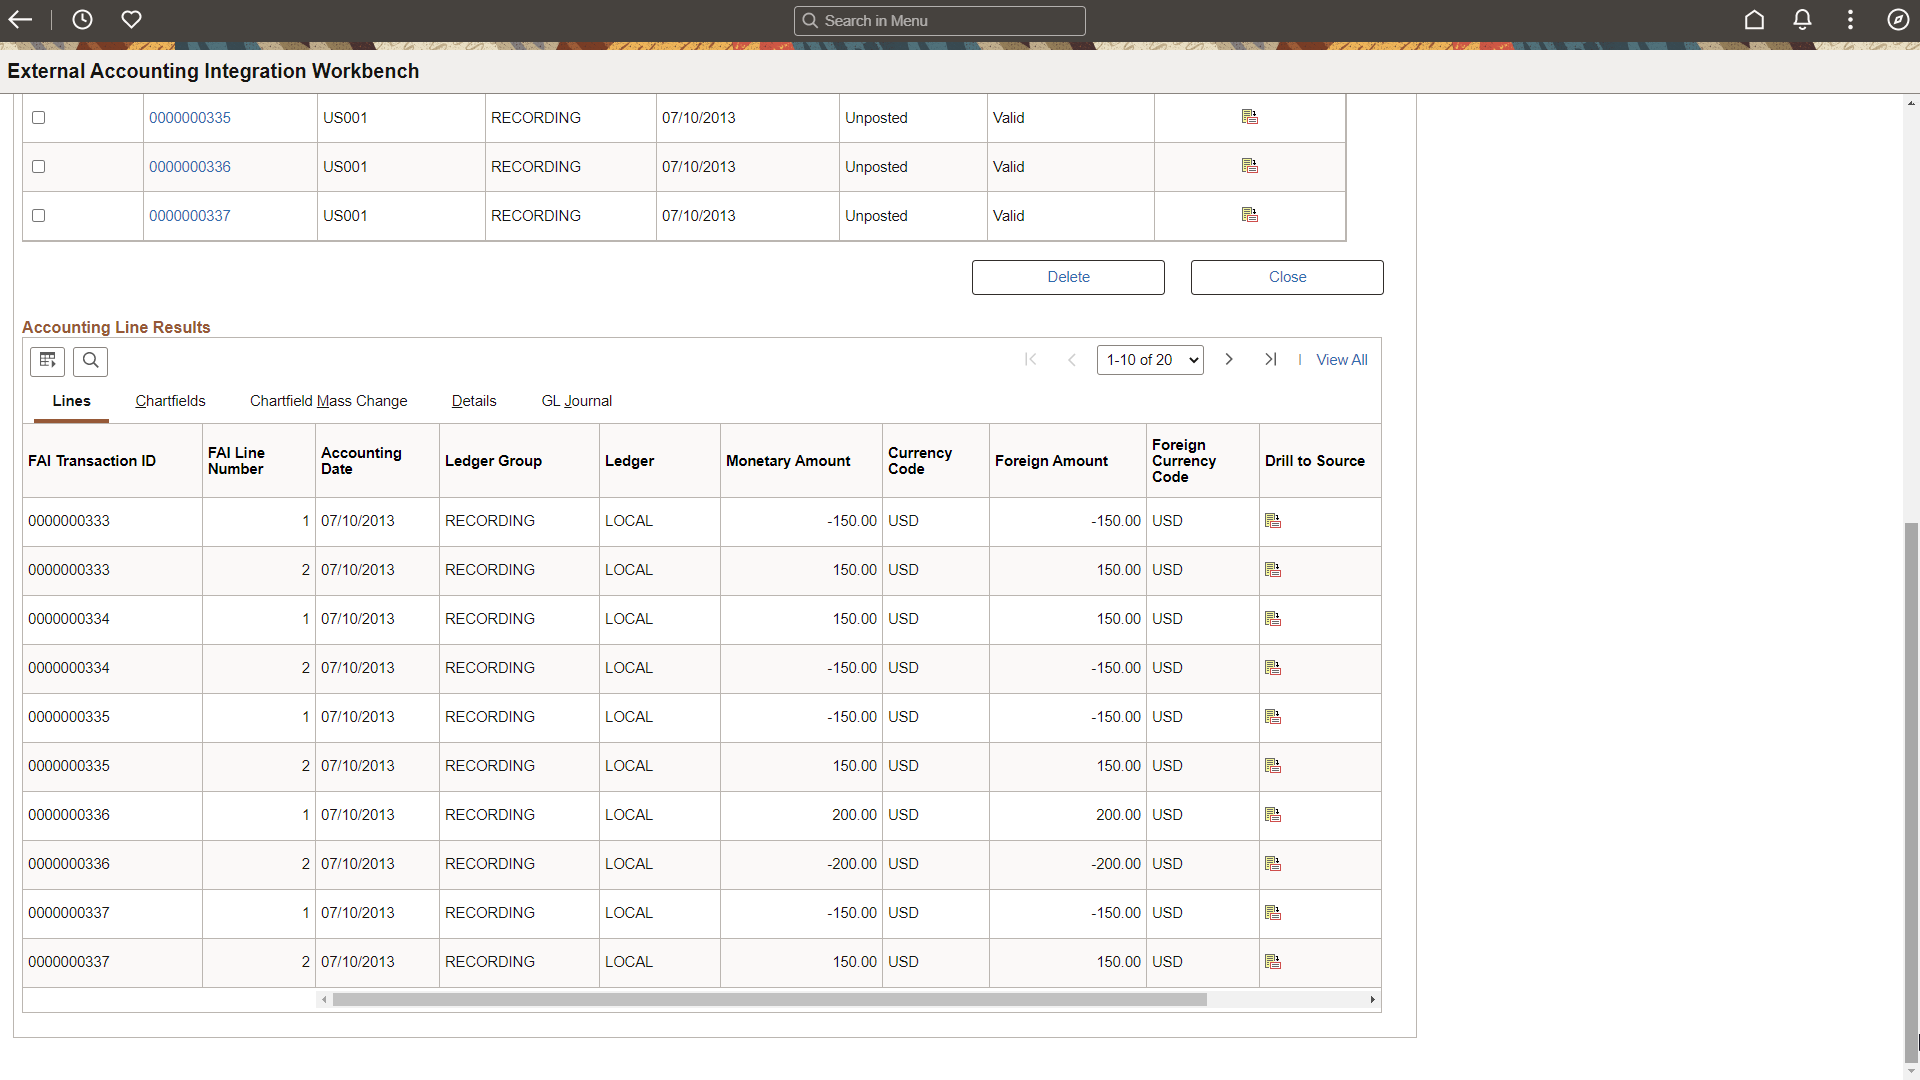 External Accounting Integration Workbench (2 of 2)